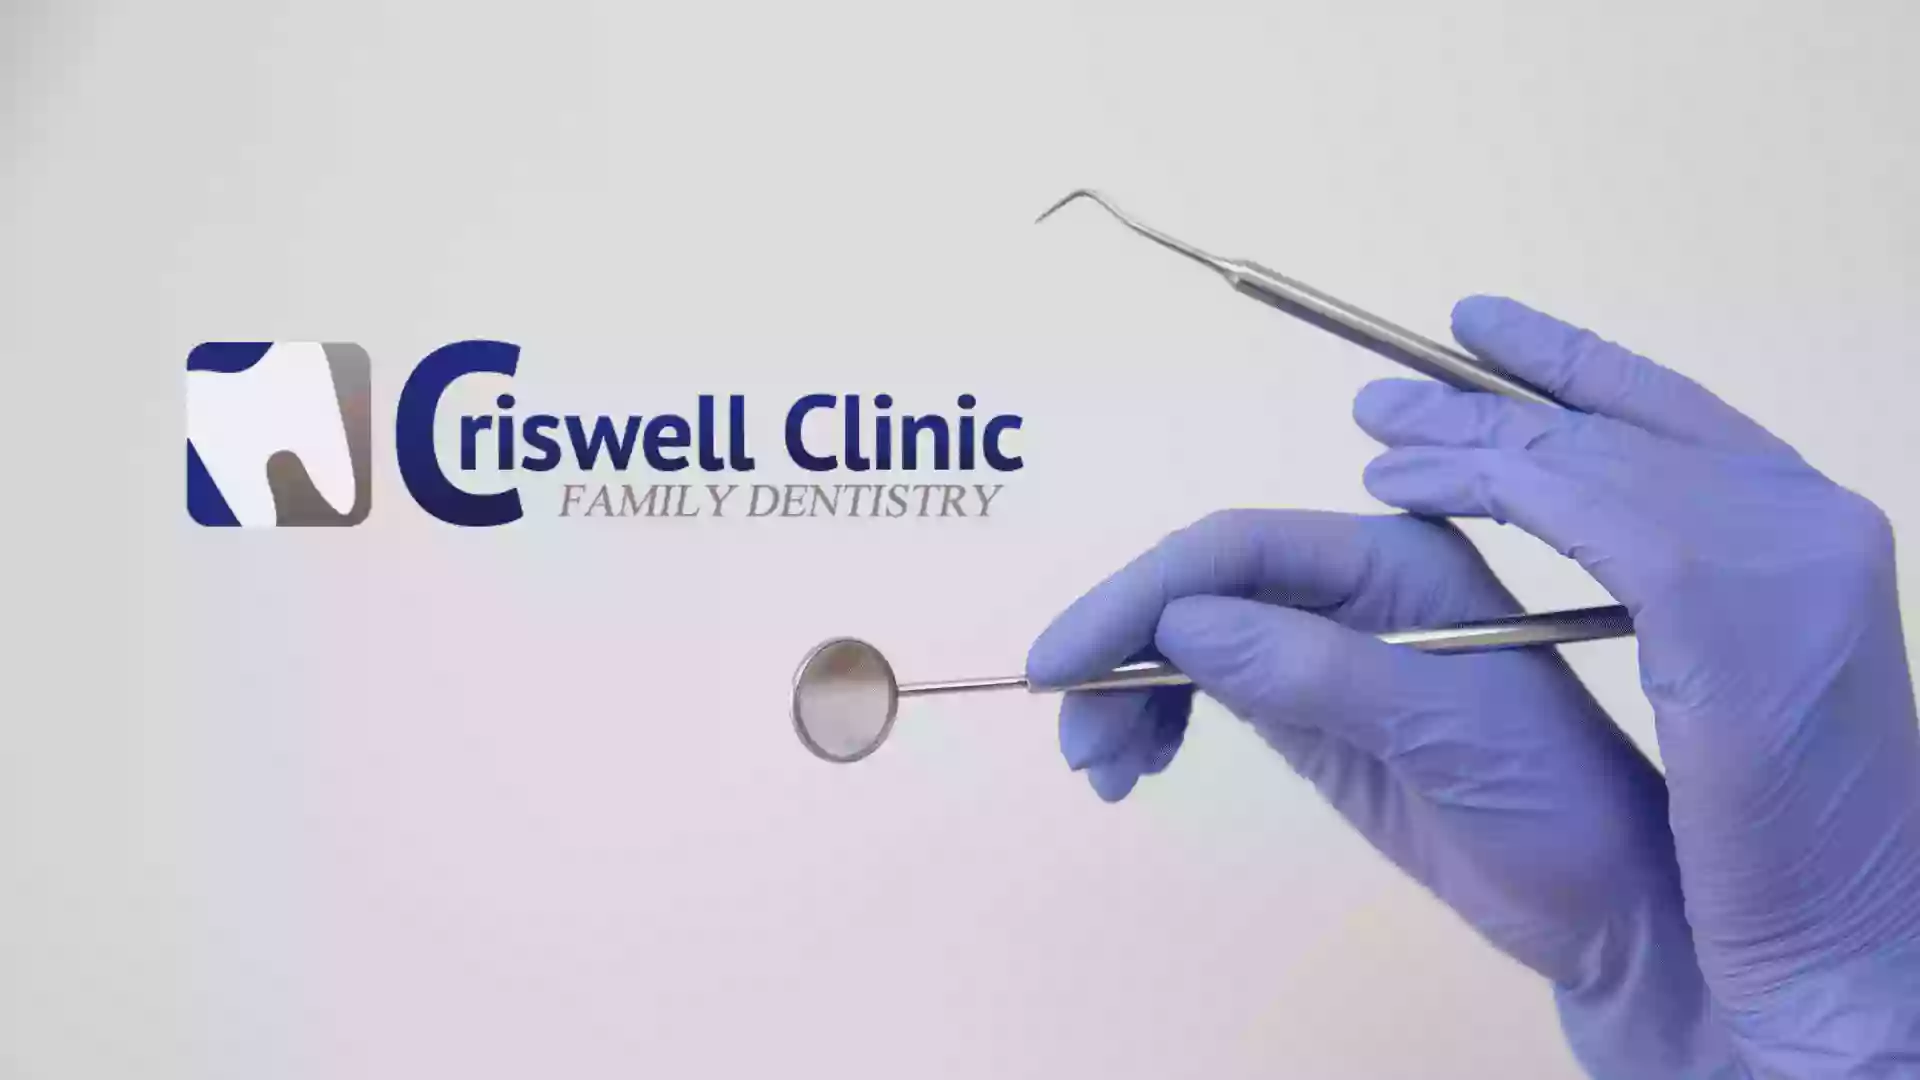 Criswell Family Dentistry